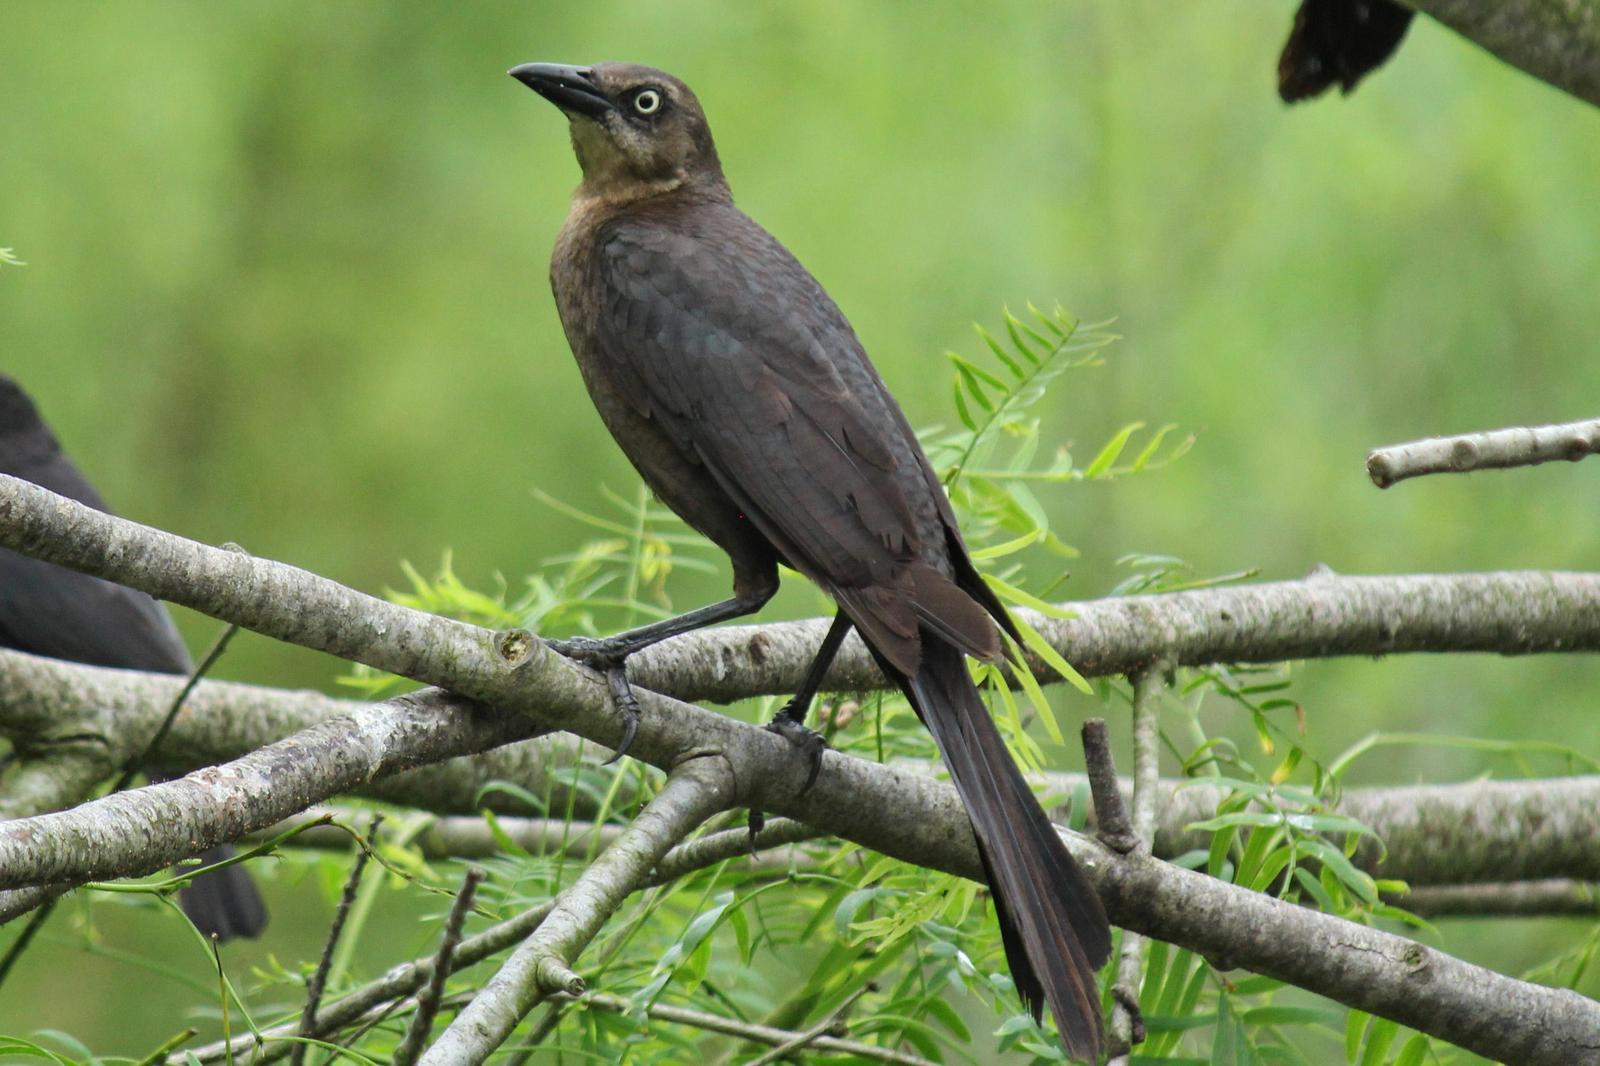 Great-tailed Grackle Photo by Kristy Baker